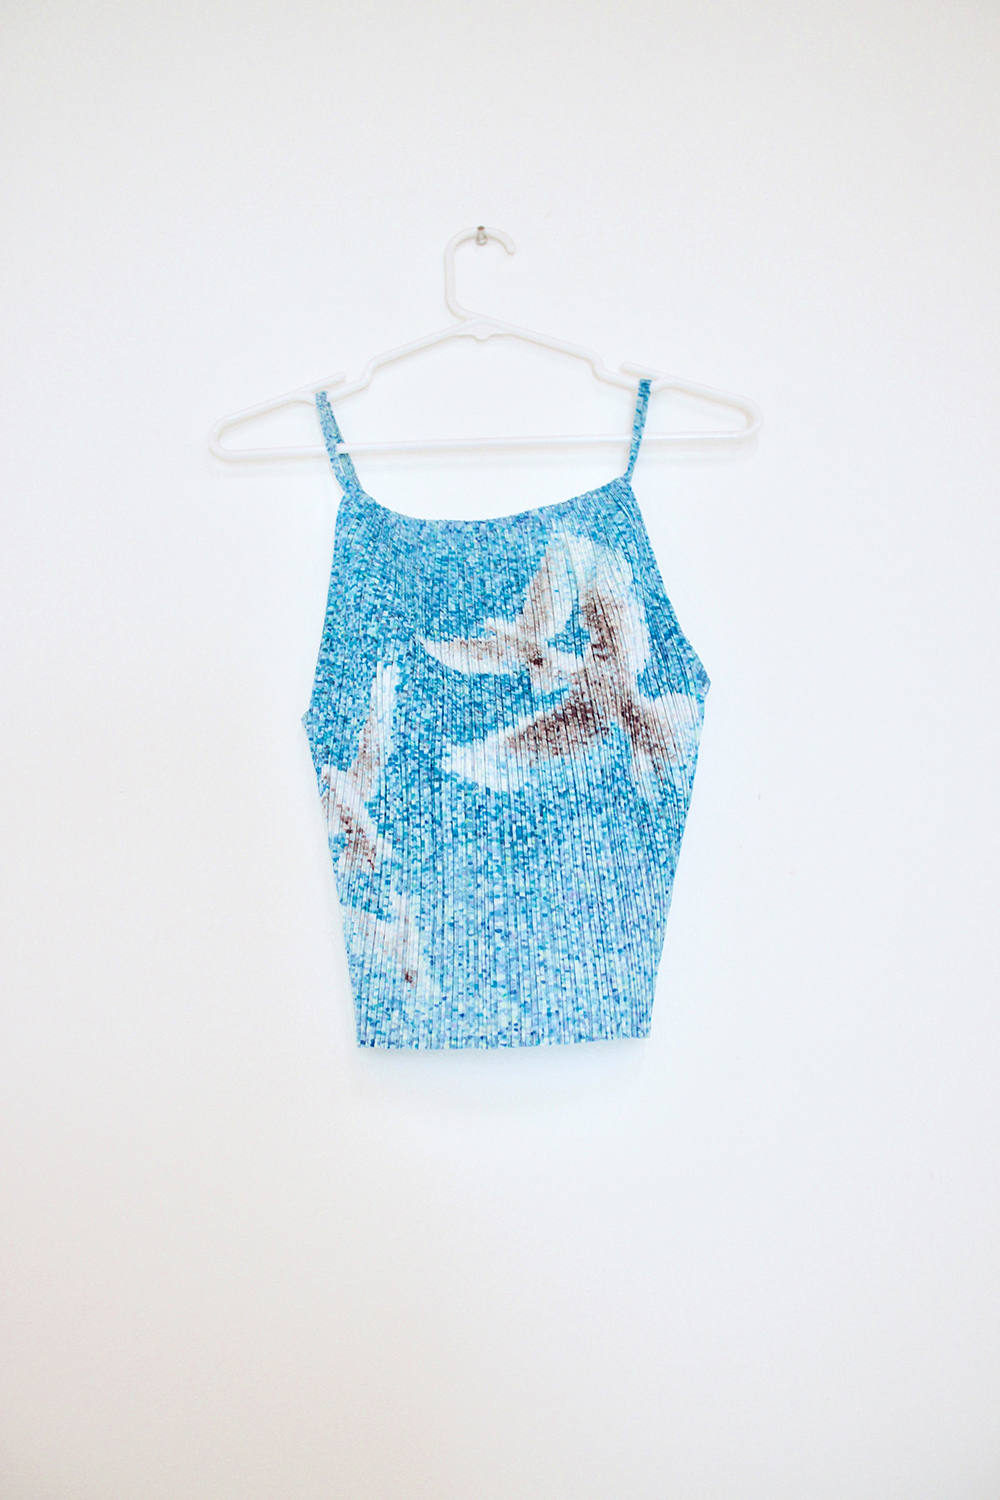 A pleated tank top with a photographic print of doves flying on it